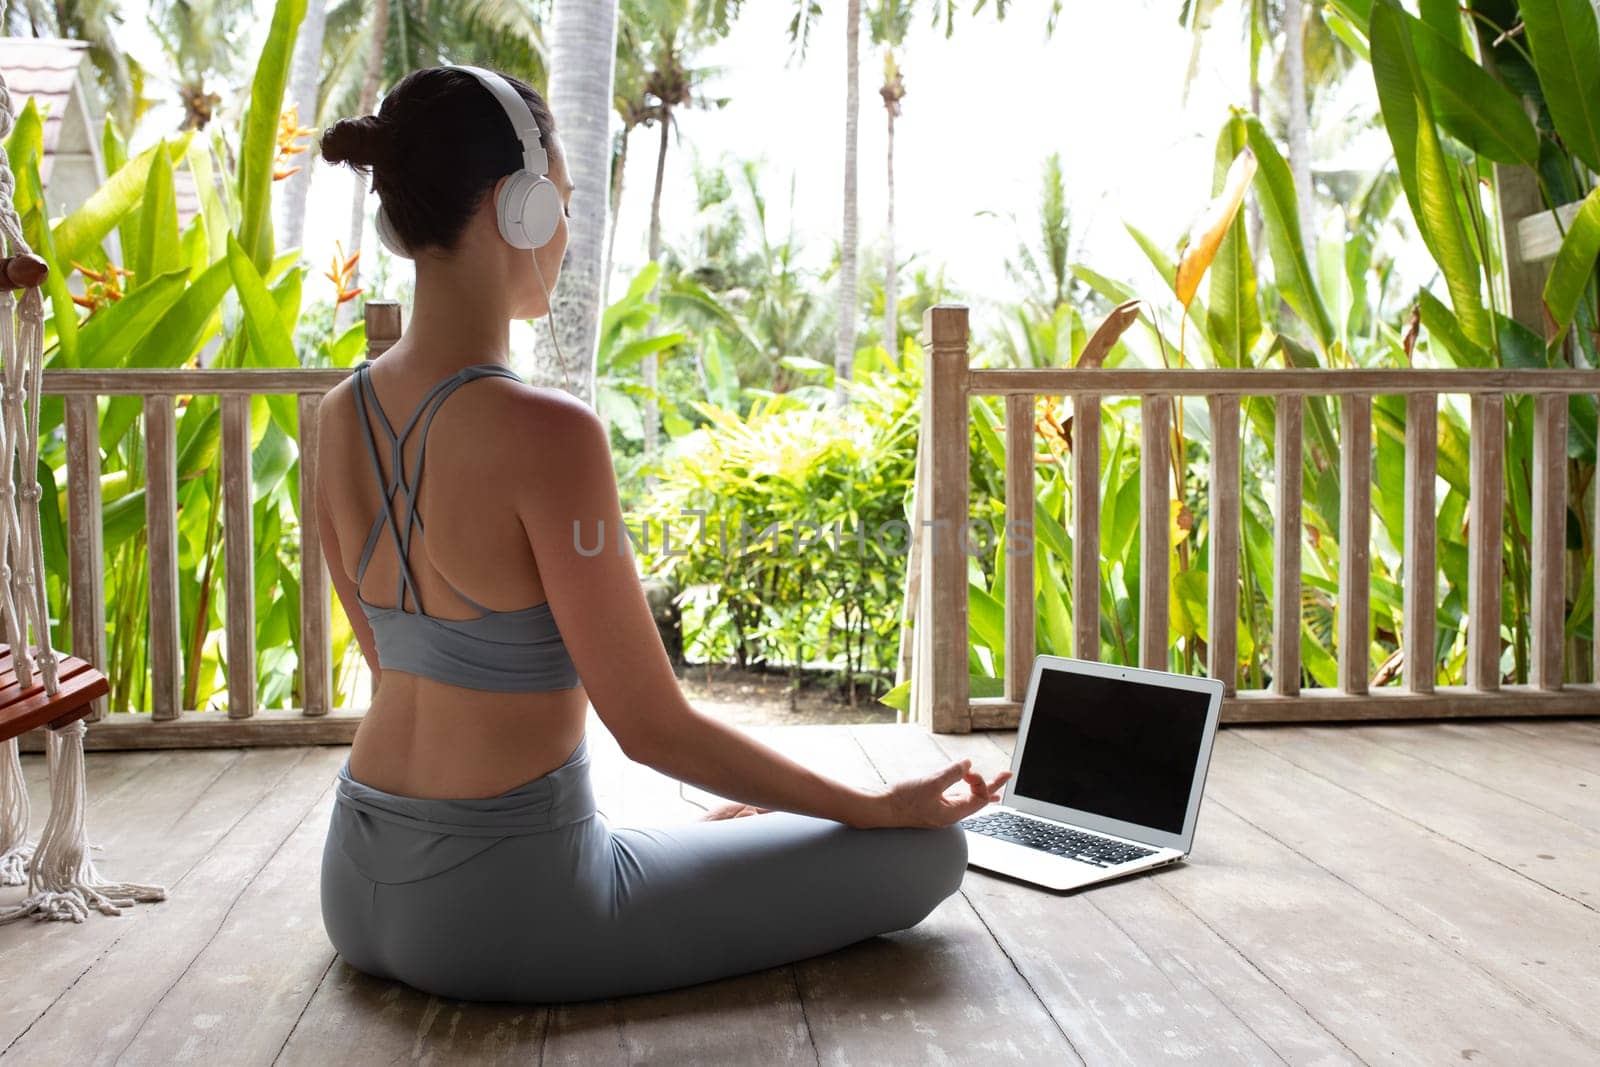 Young woman in sports clothing following online meditation using laptop and headphones outdoors. Spirituality and mental health concept.